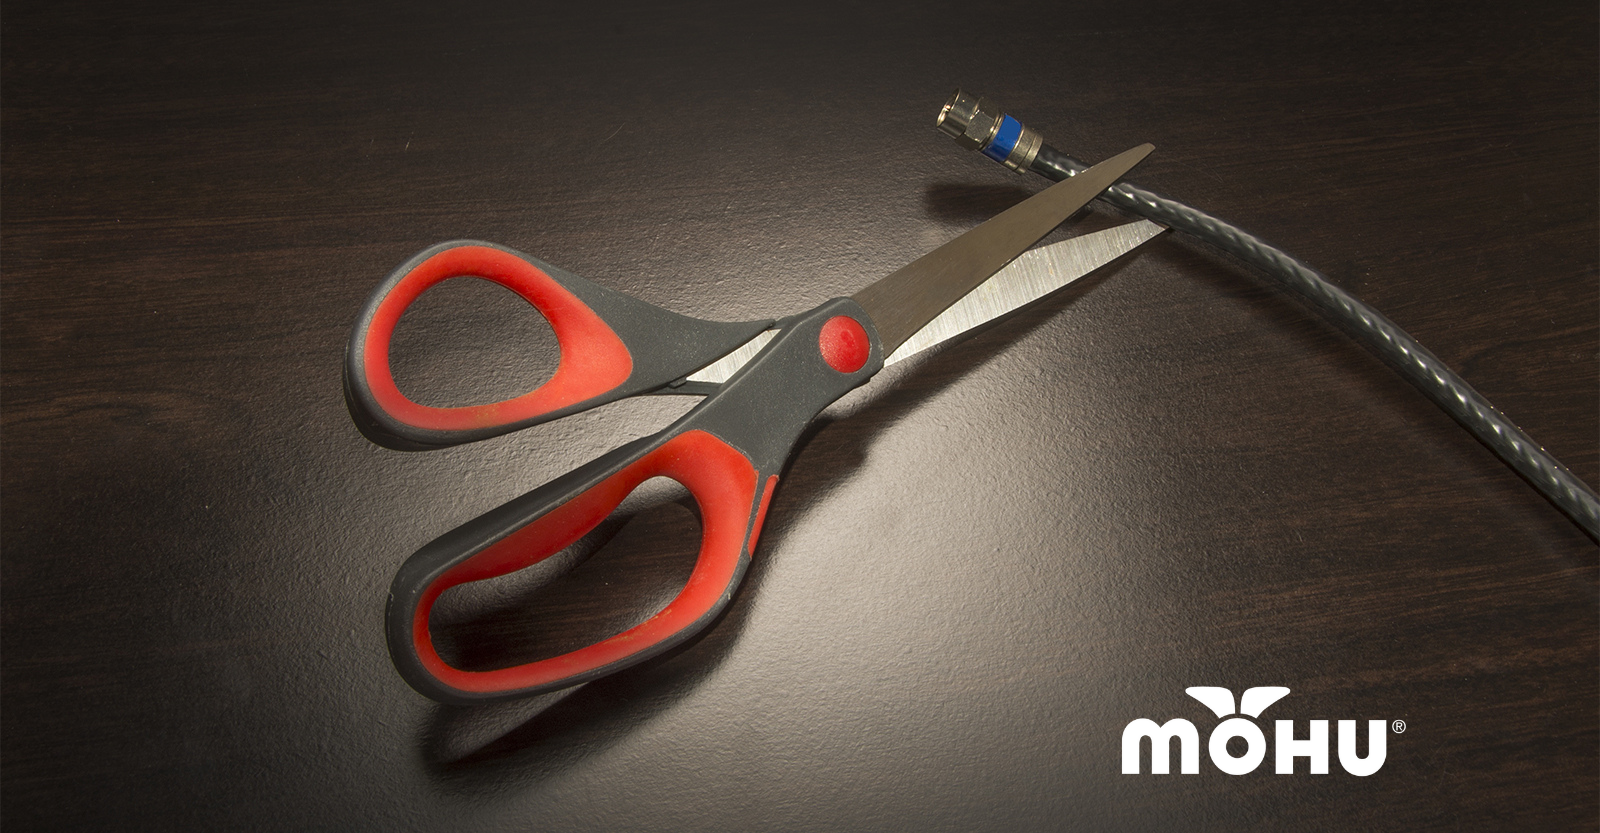 Scissors cutting a coax cable with the Mohu Logo